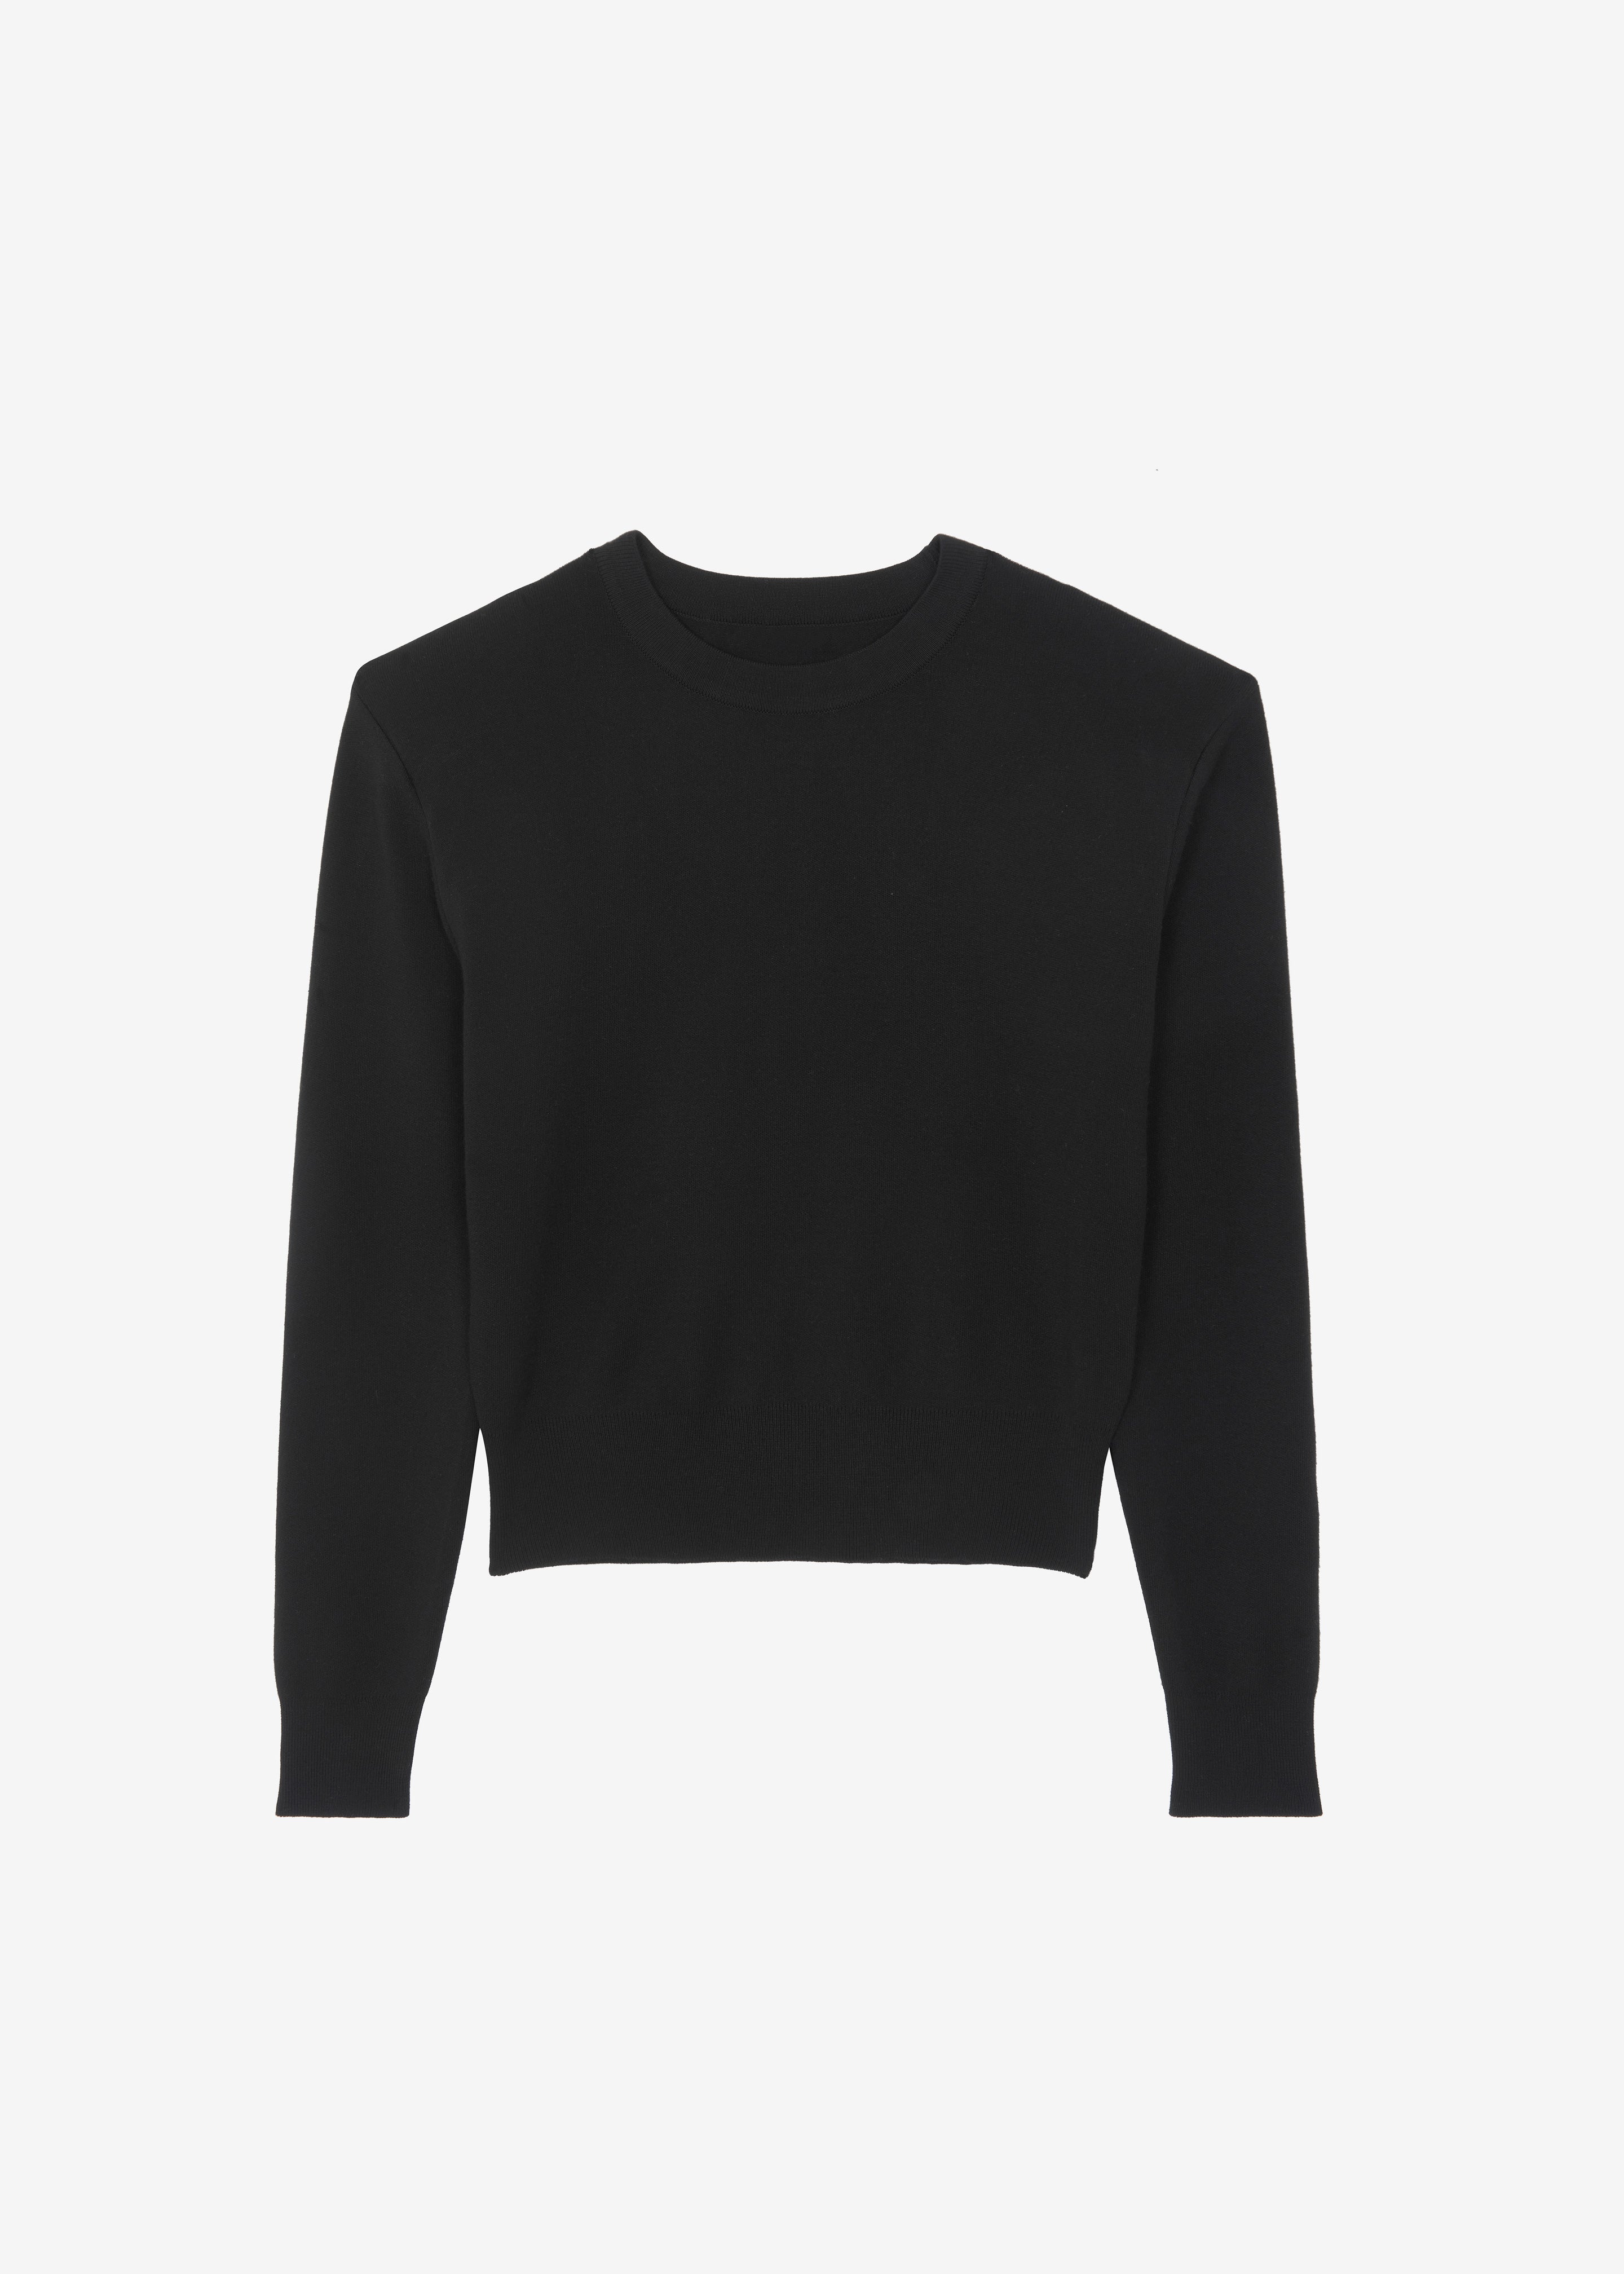 Clover Padded Knit Top - Black - 10